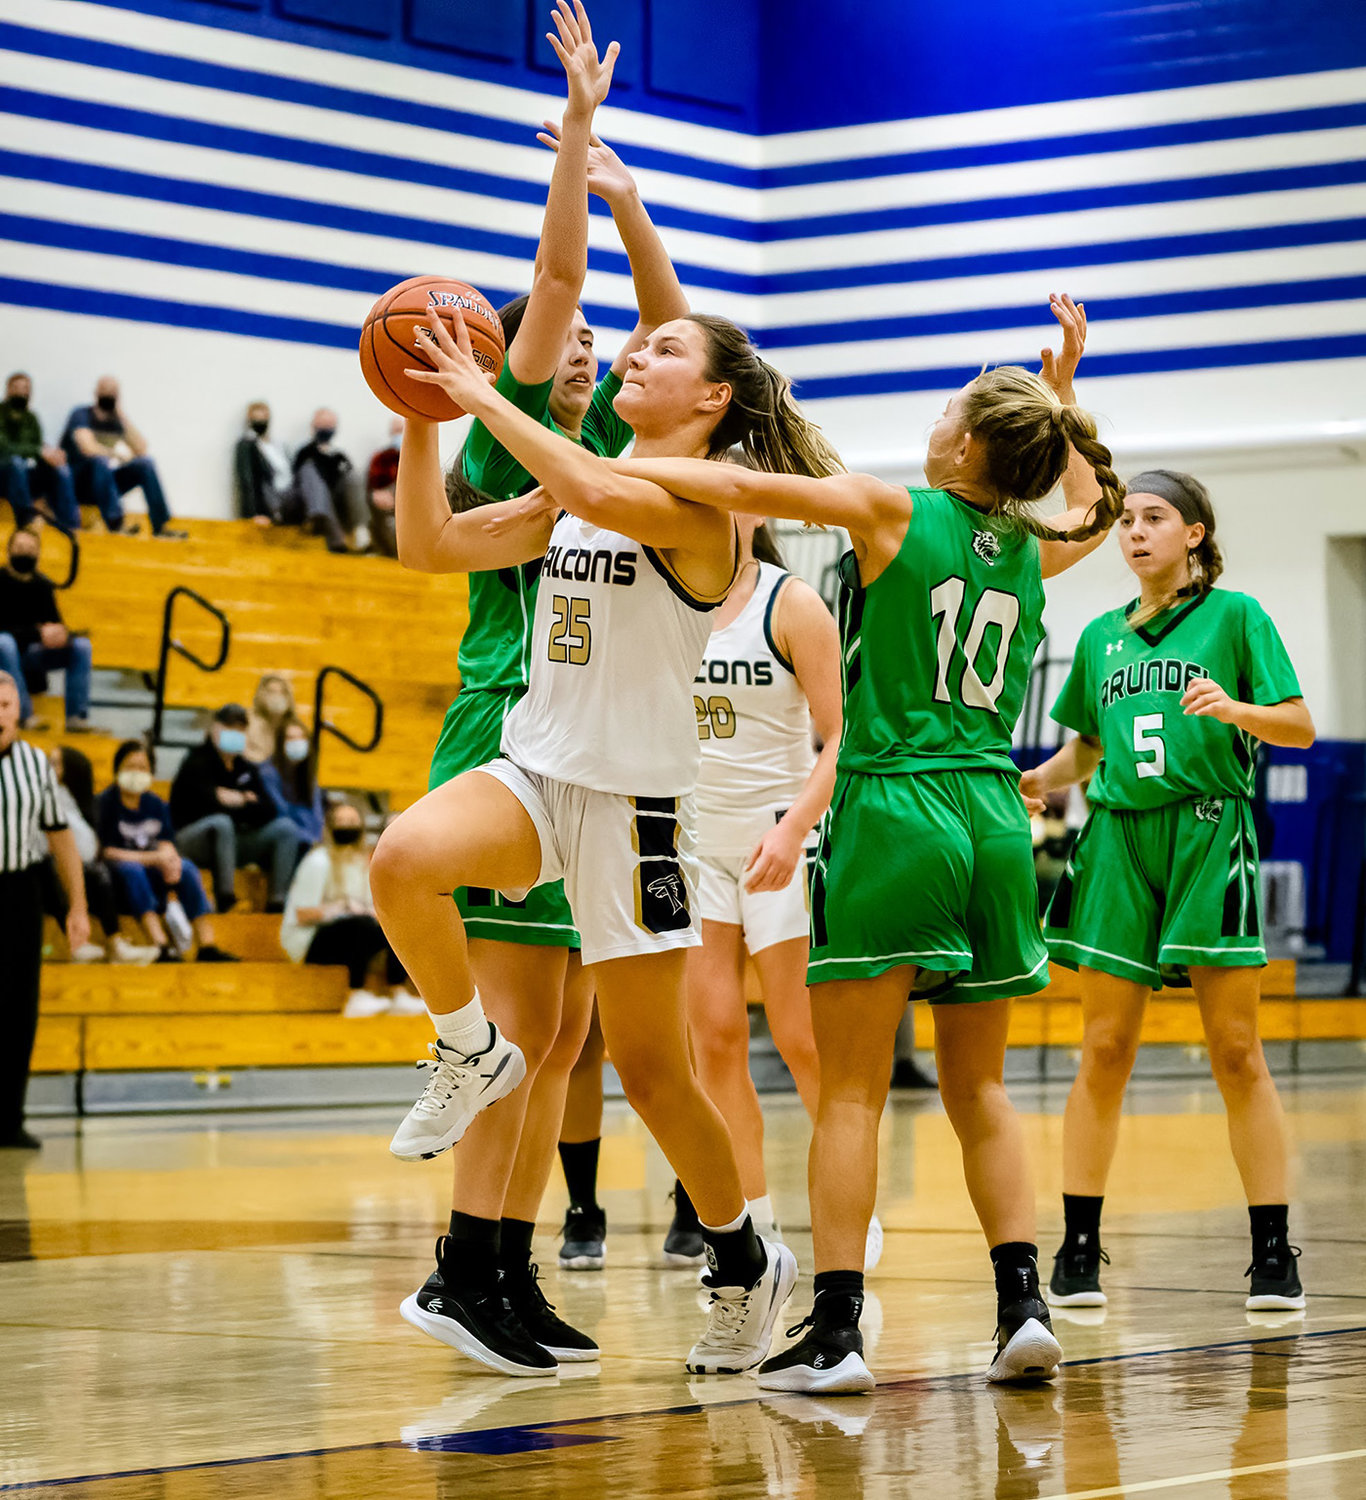 For Severna Park to make a deep playoff run this year, the team will need senior shooting guard Karli Kirchenheiter to continue her stellar play.